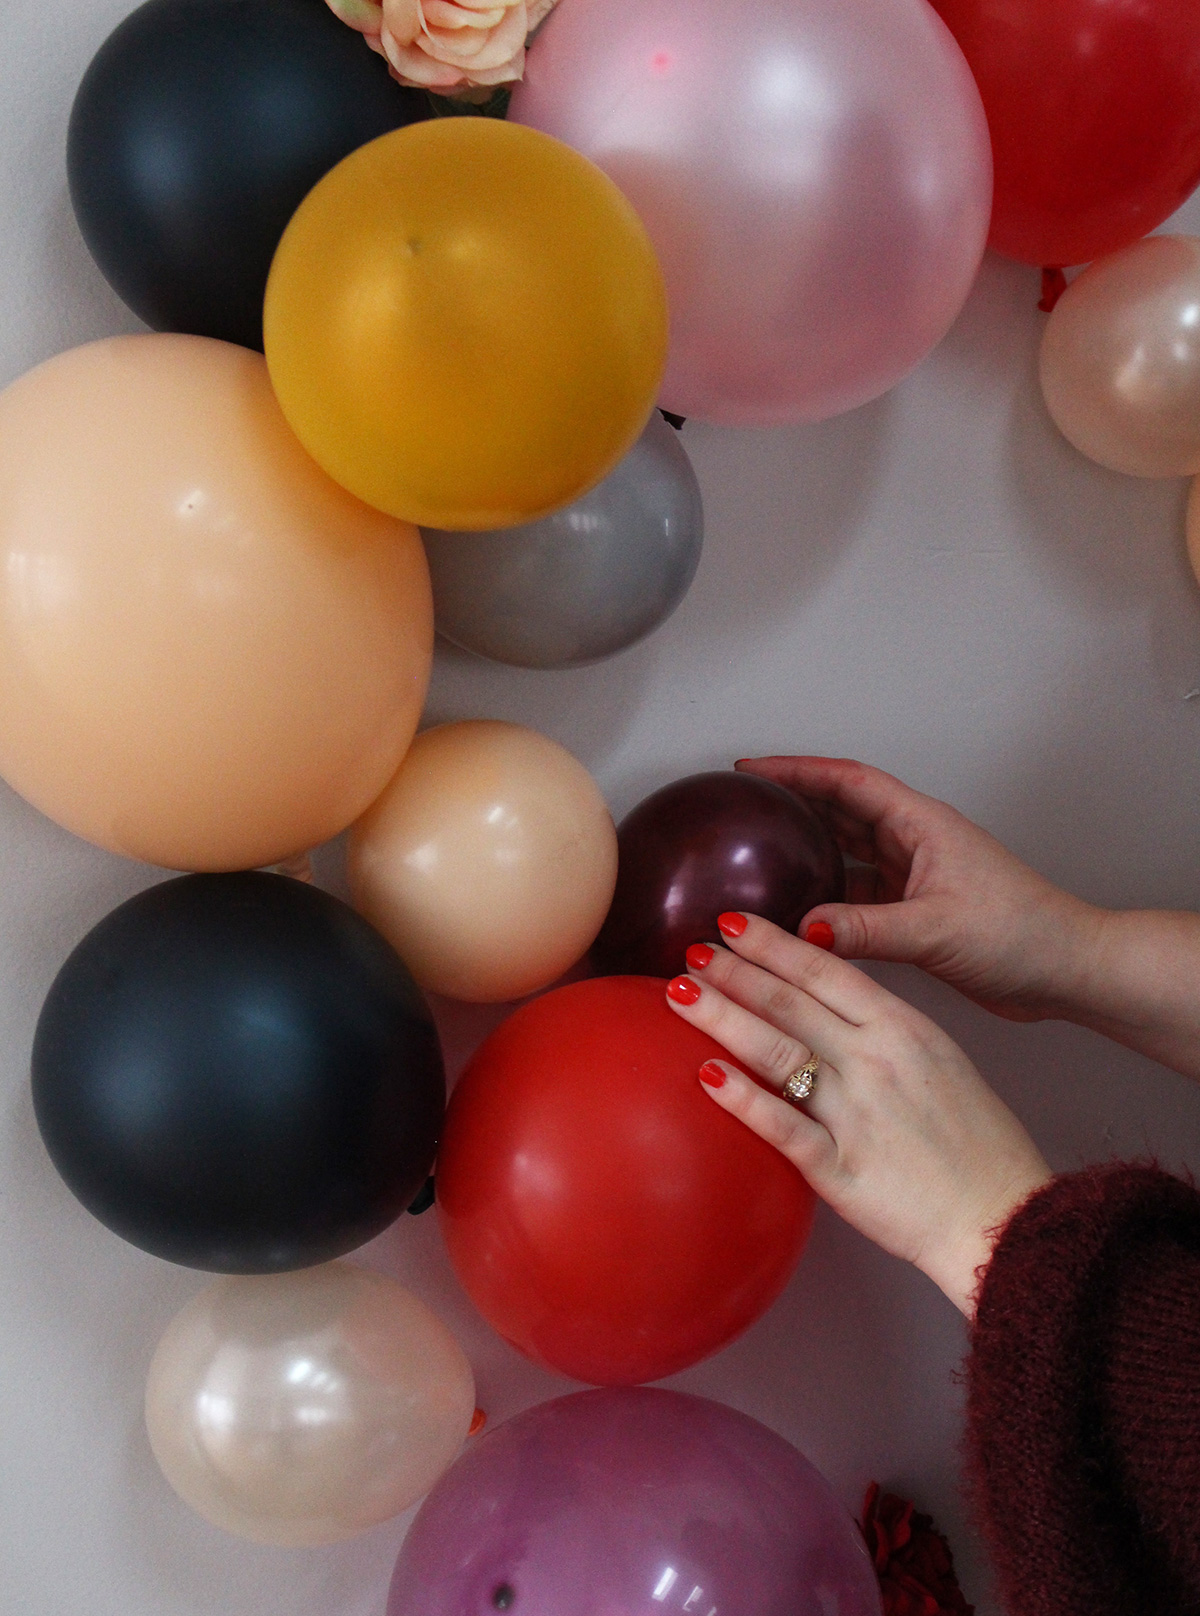 How to make a DIY Balloon and Flower Heart Backdrop For Valentine's Day